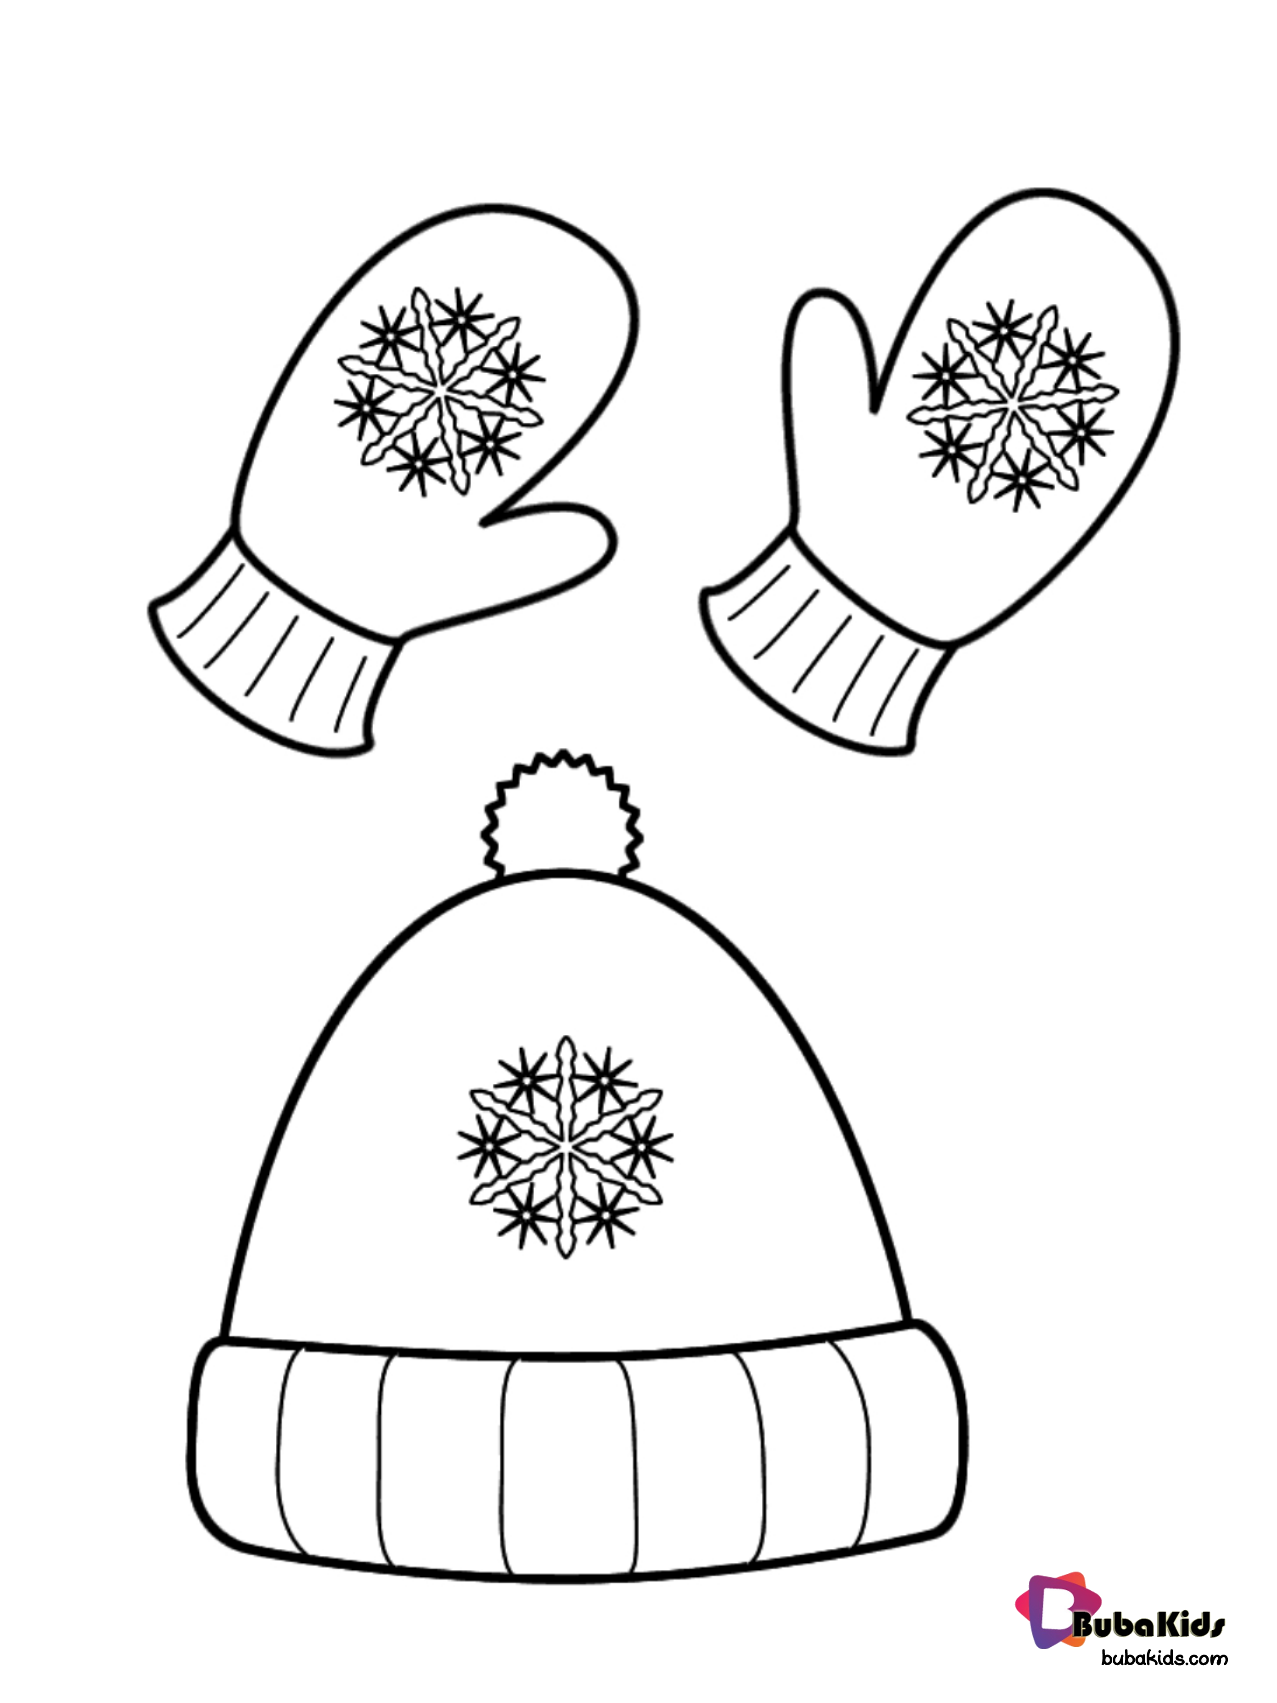 Free Winter hat and gloves coloring page. in 2020 | Coloring pages ...